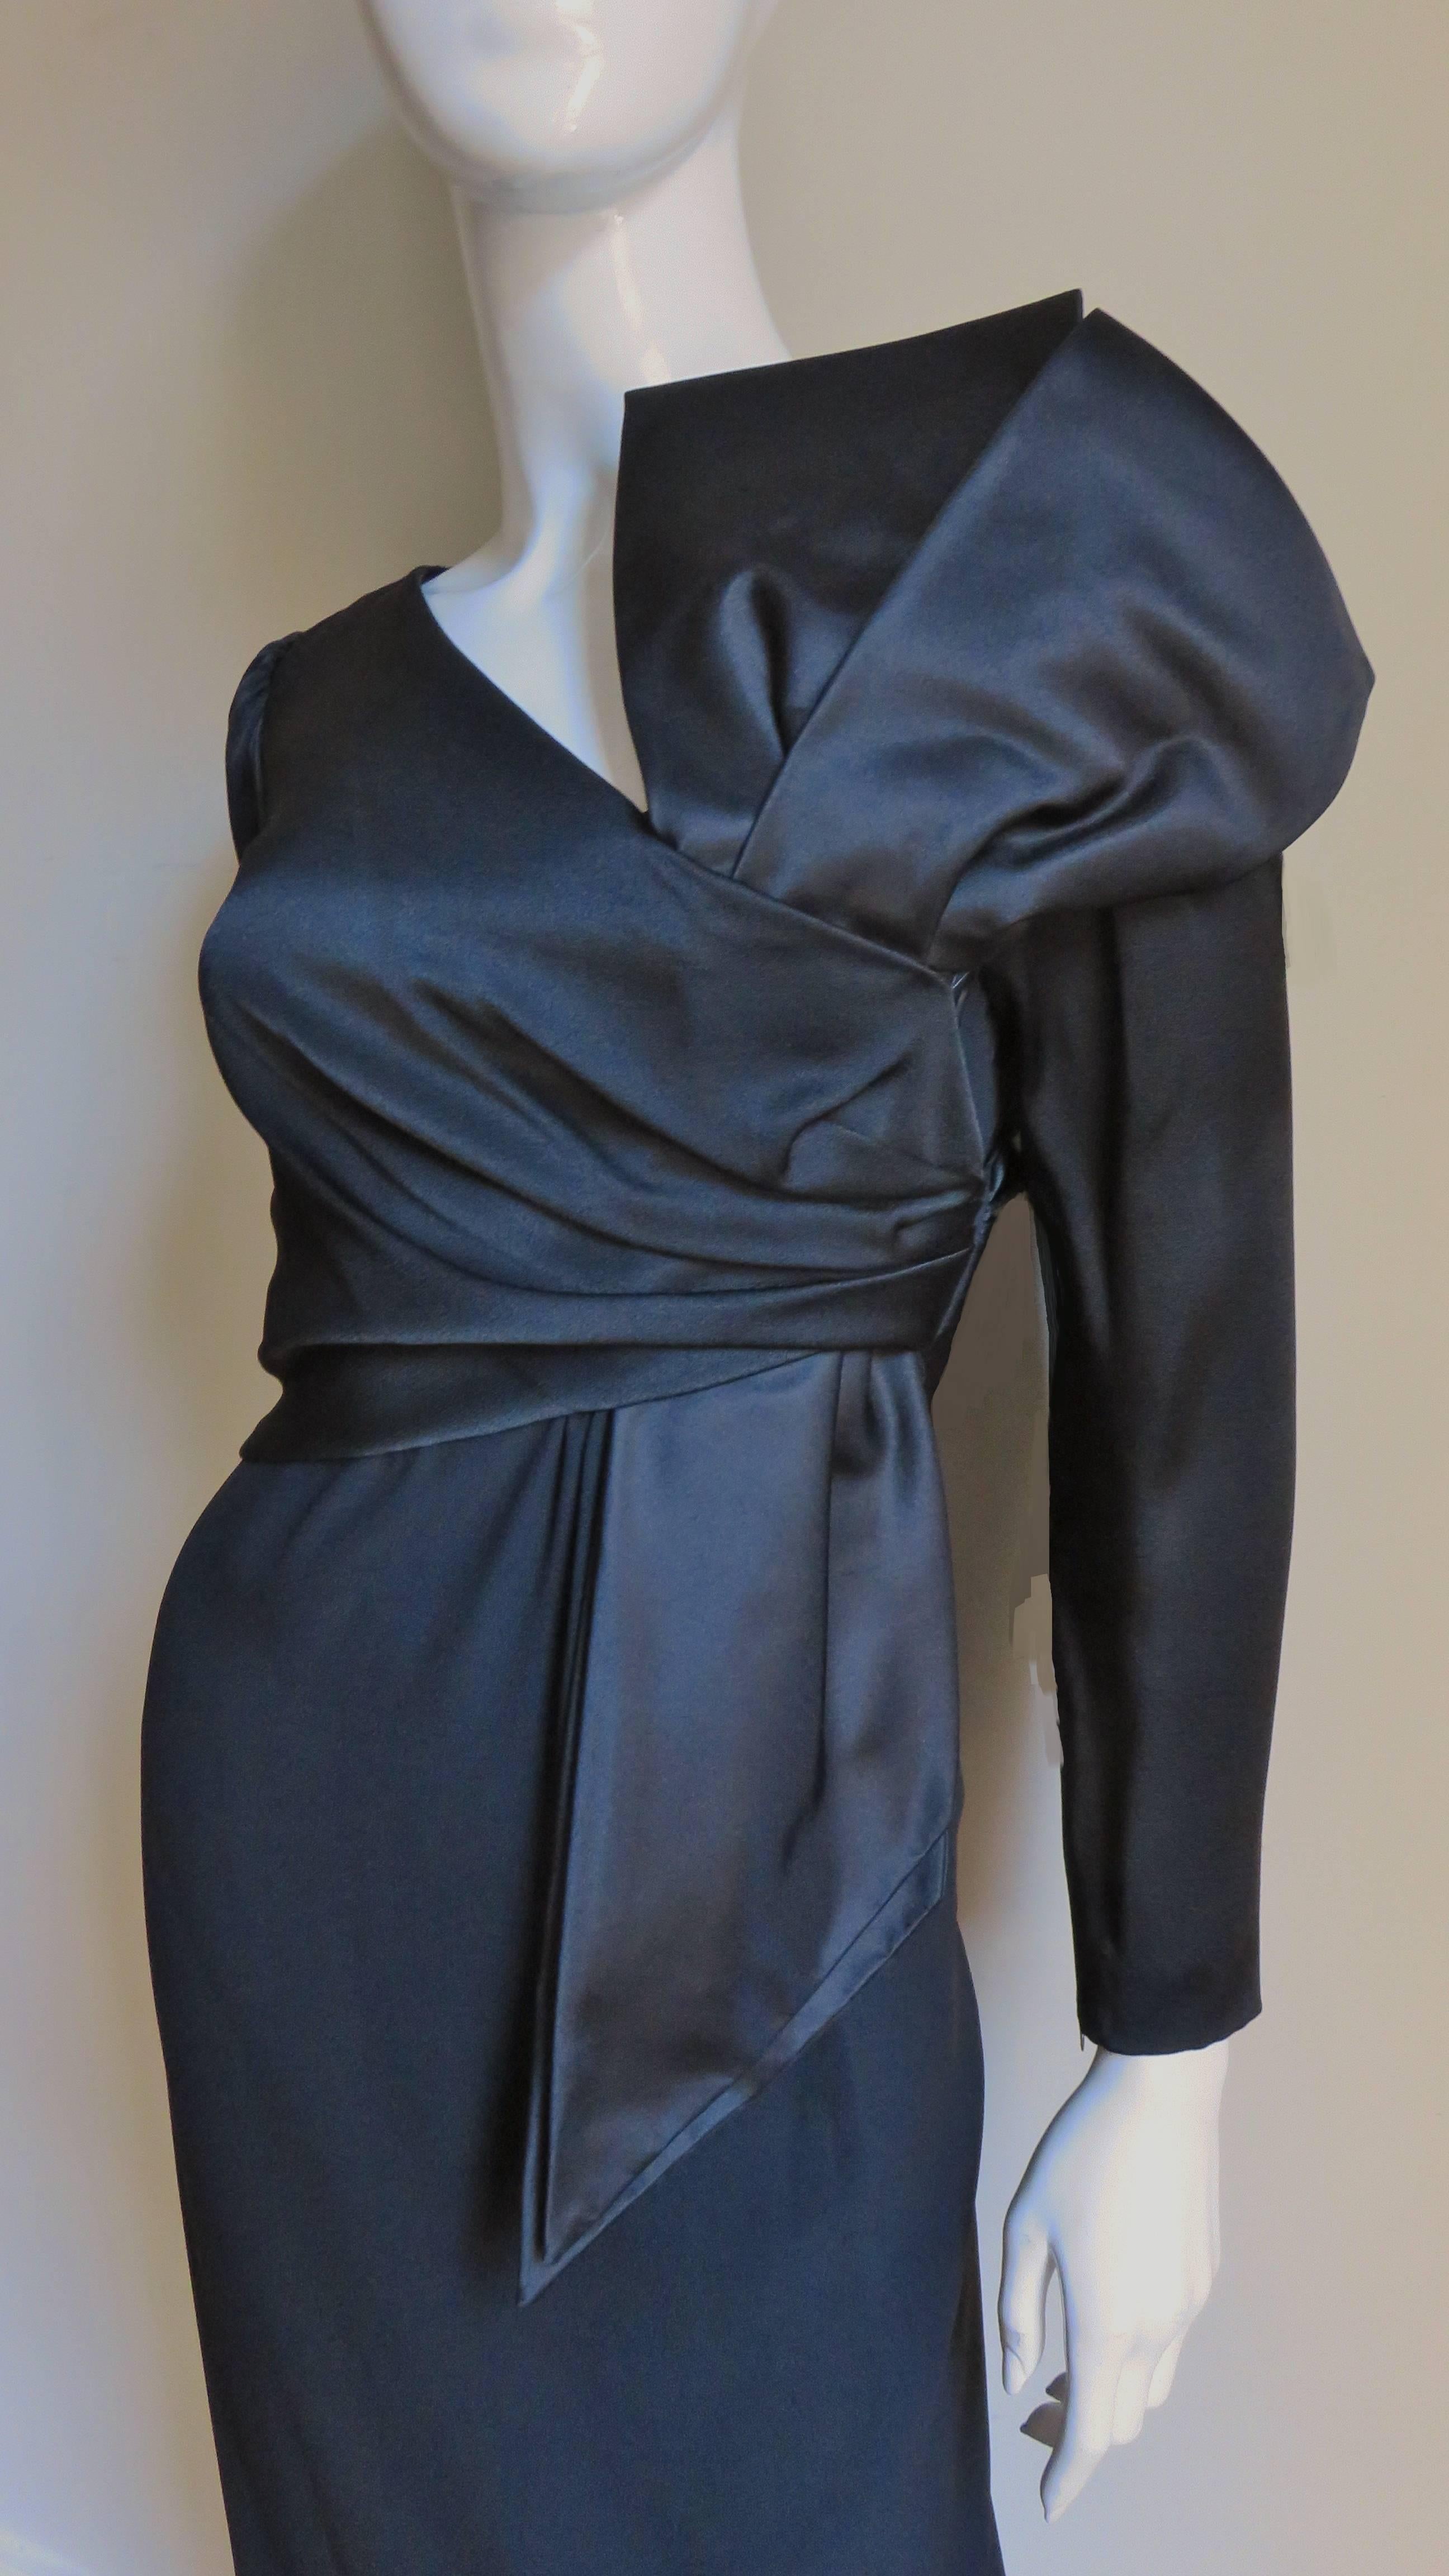 A fabulous dramatic black silk and jersey dress by Bill Blass.  It is semi fitted with long sleeve dress and a silk bodice wrapping at the front giving forming a large vertical bow off center front.  The sleeves are gathered at the shoulders and